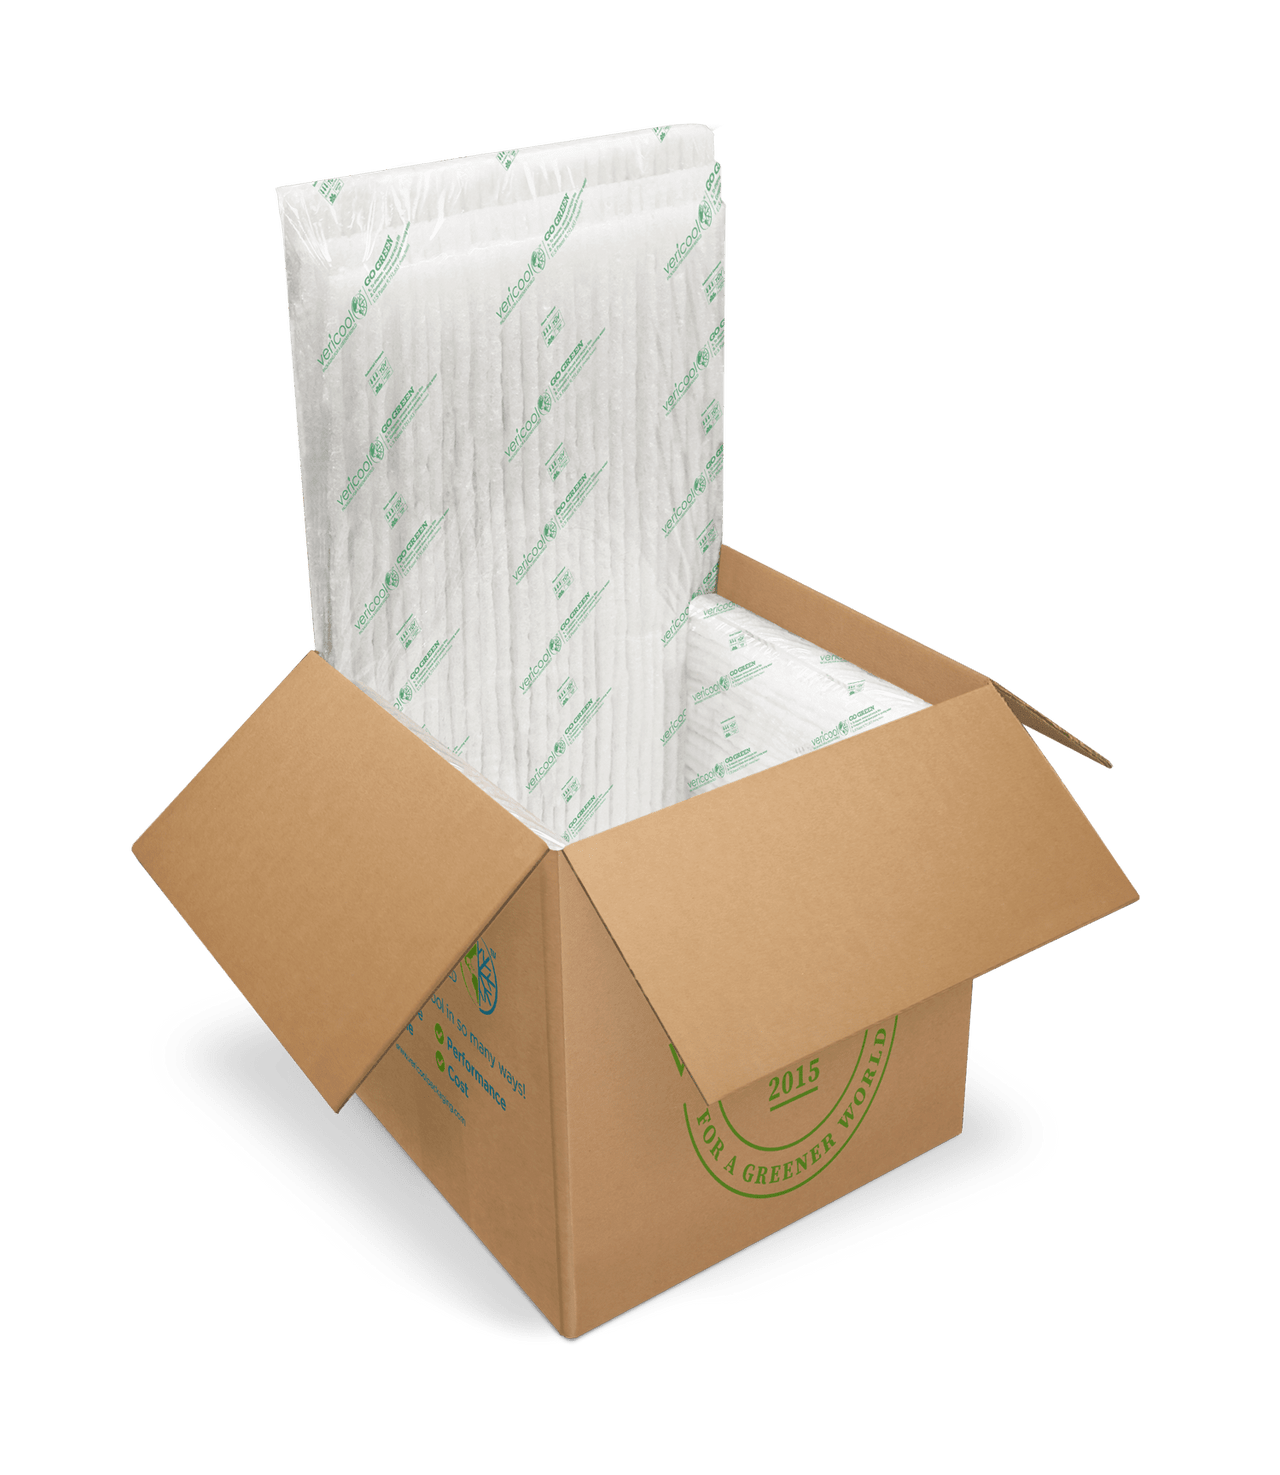 EXPANDED POLYSTYRENE BOX 12L FOR LONG TIME COLD CHAIN - THICKNESS 50MM